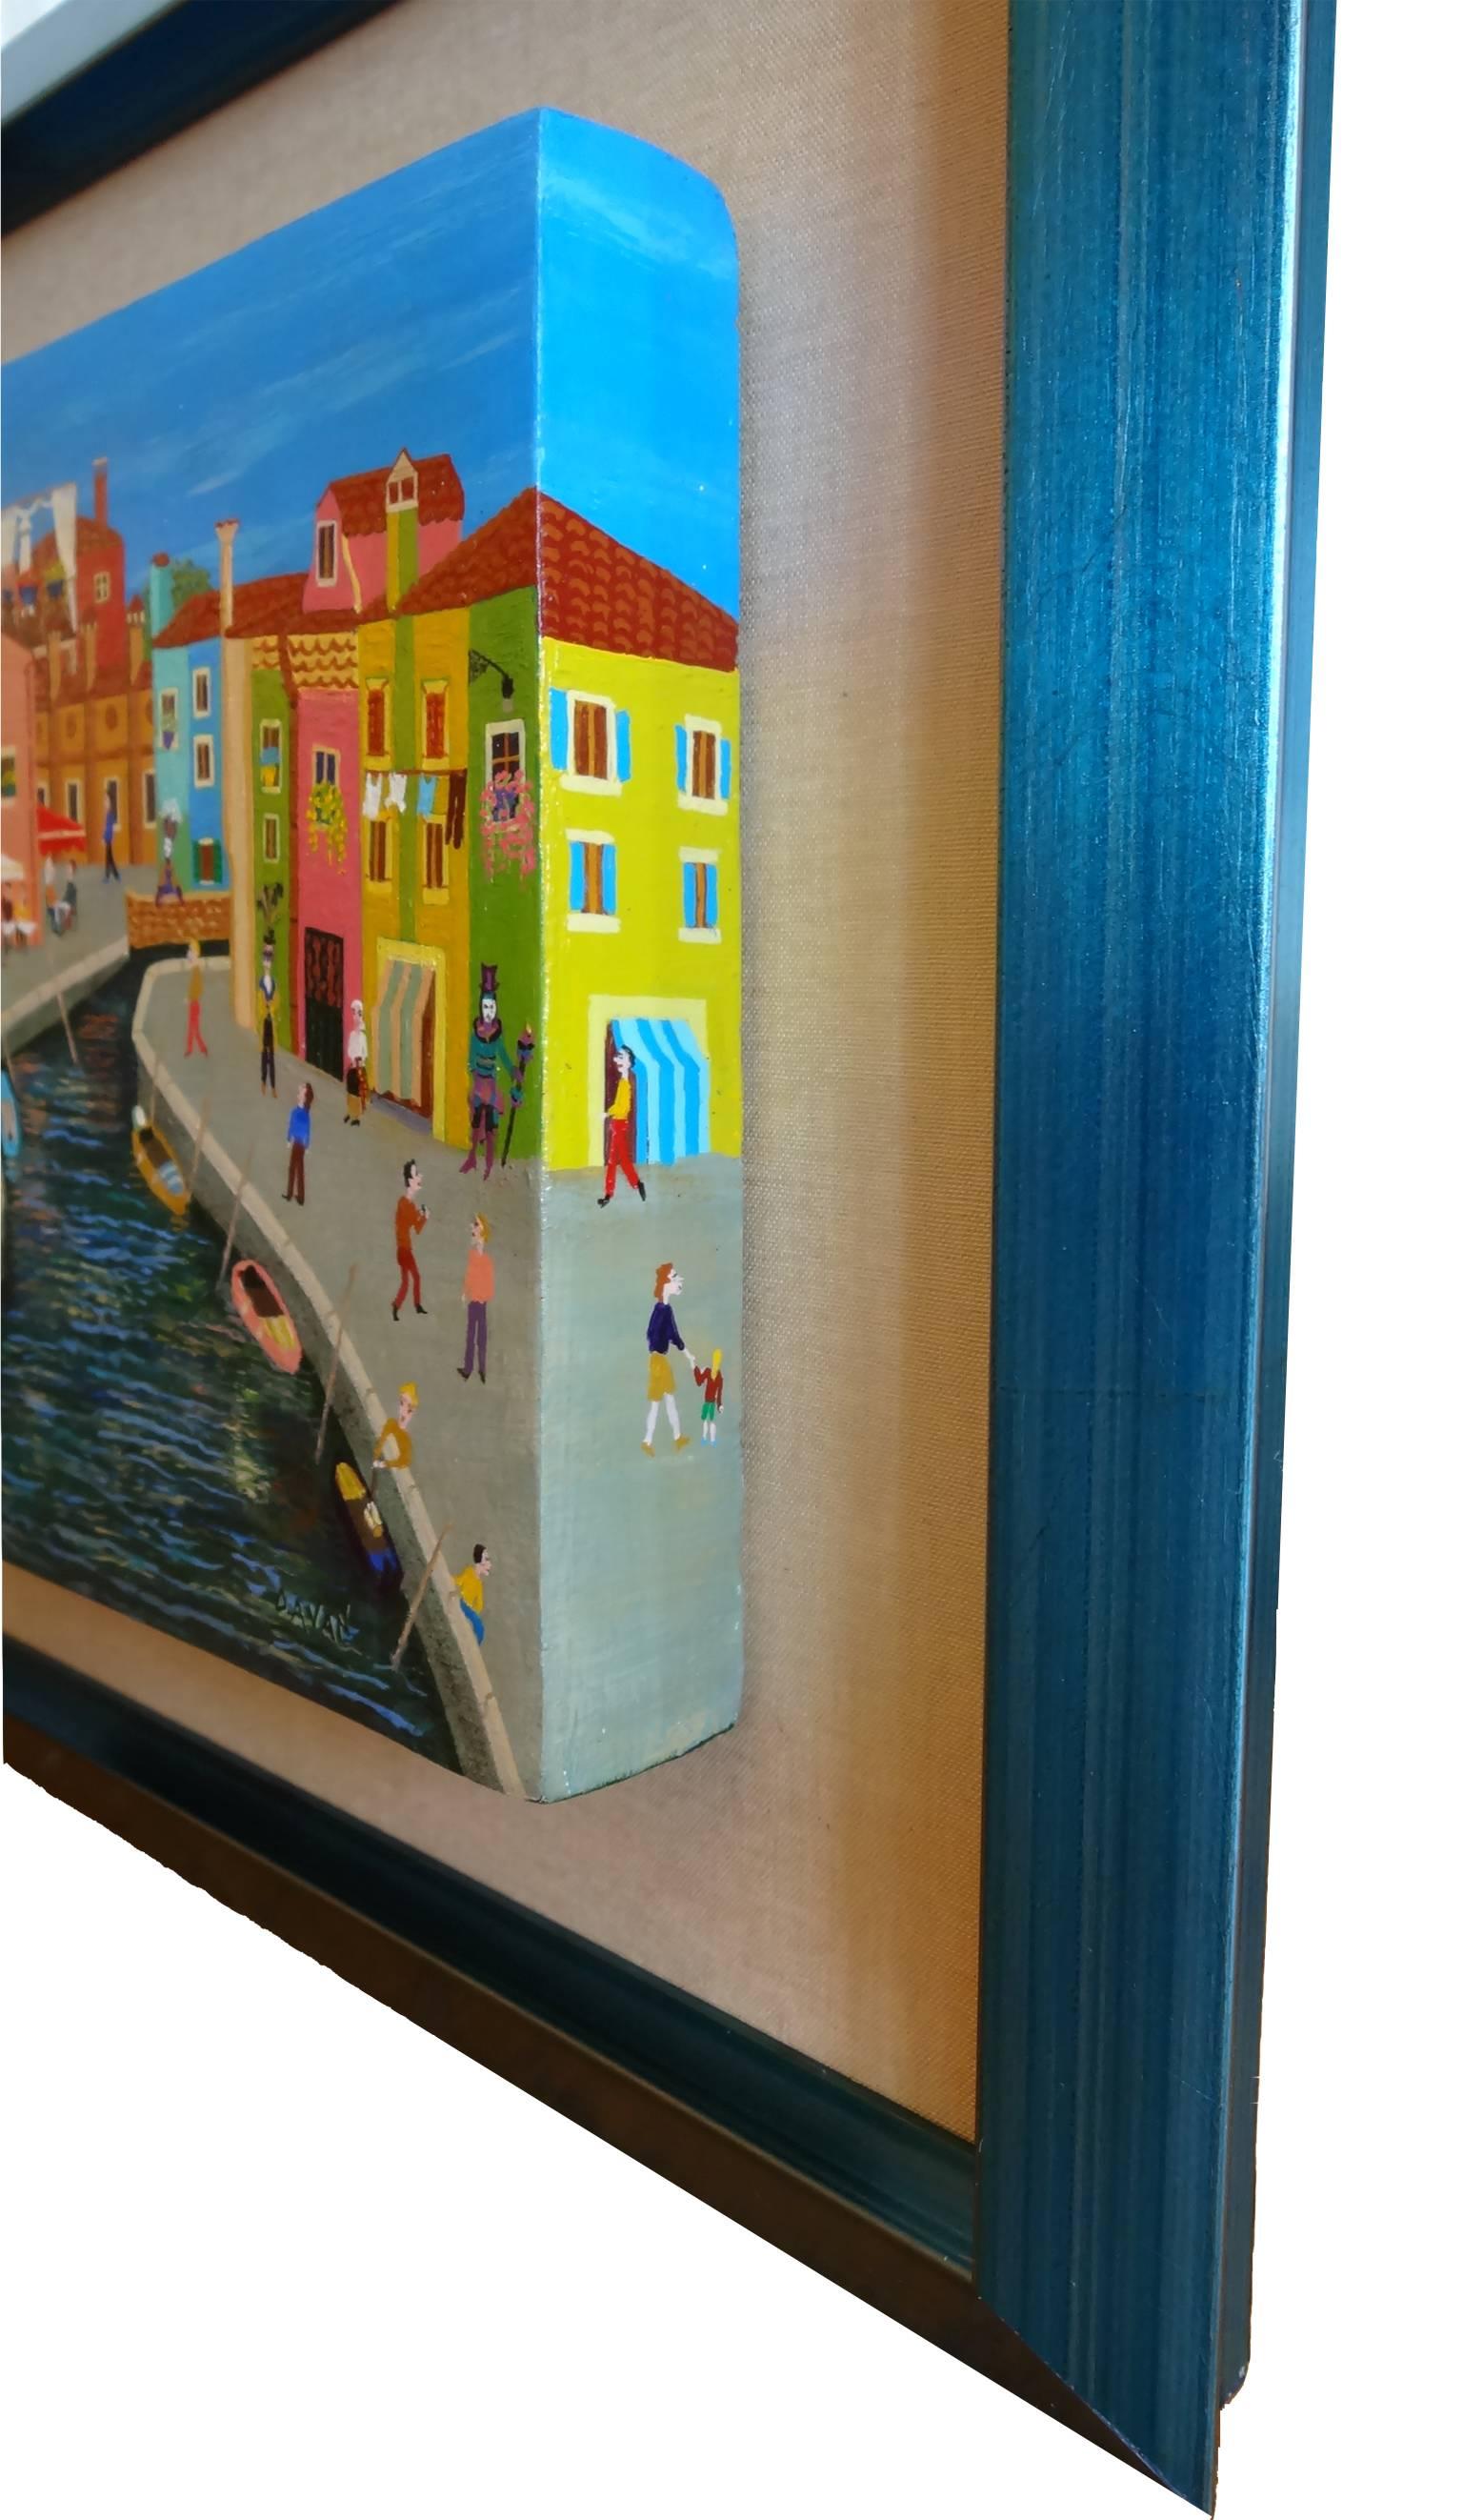 This cheery scene captures the vibrant island of Burano, Italy in the Venetian lagoon. Wanda Davan paints the rainbow colored buildings and complements them with the wonderful energy of the people walking the streets. She uses metallic paint as an